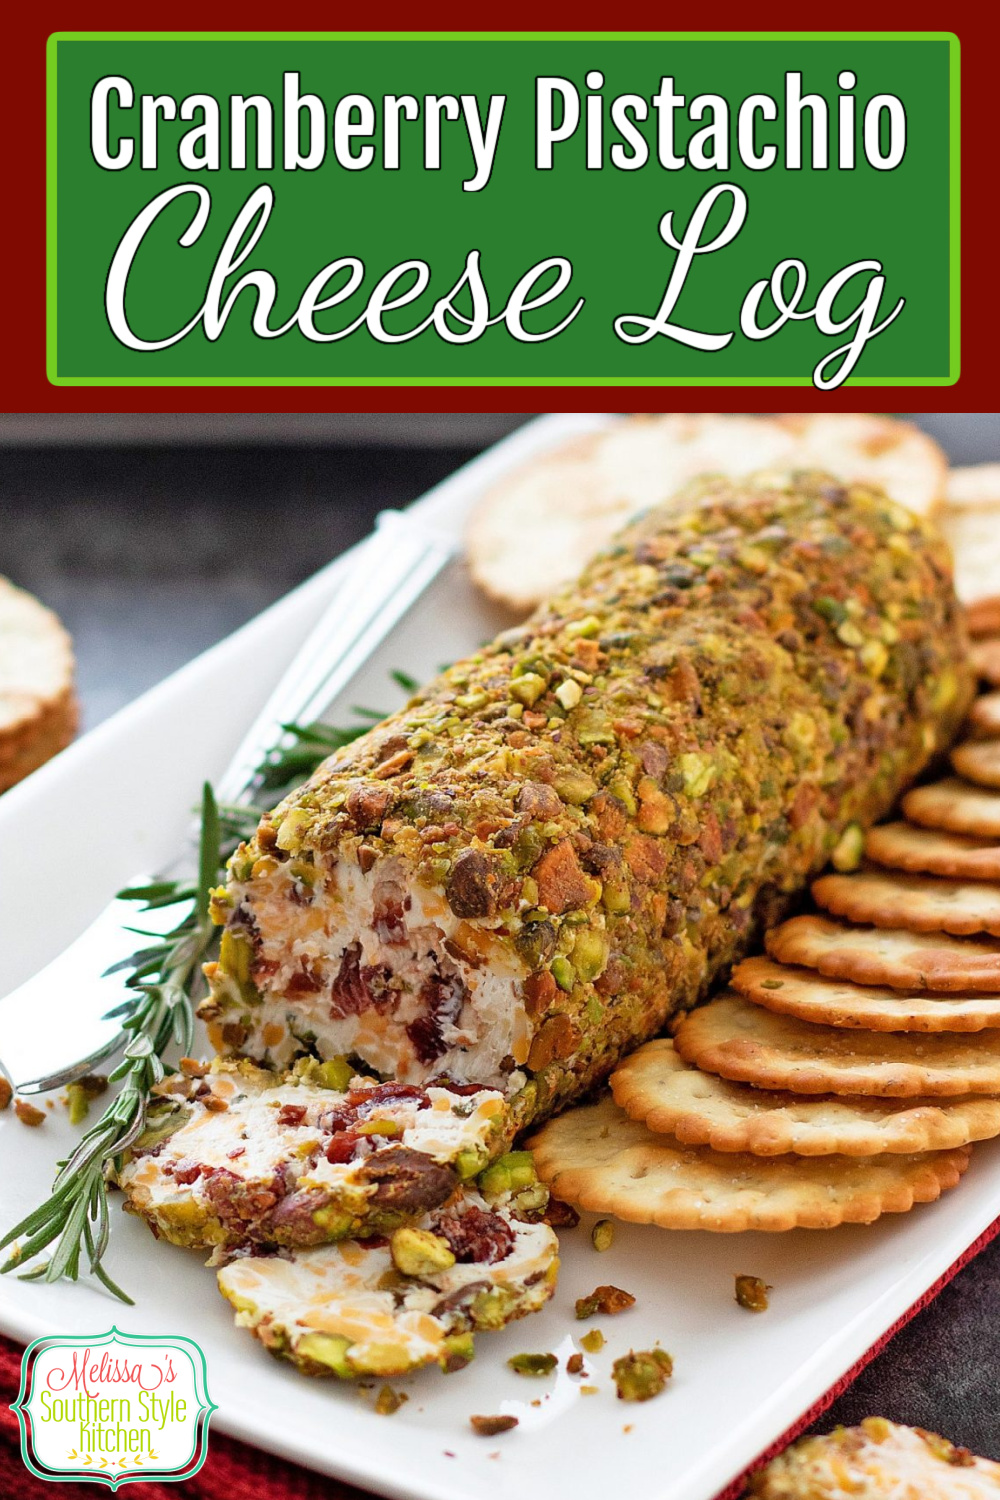 This Easy Cranberry Pistachio Cheese Log is filled with seasonal flavors and it comes together in a snap #cranberrycheeselog #cranberrypistachiocheeselog #appetizers #holidayrecipes #pistachiocheeselog #Christmasrecipes #cranberries #cheese #southernfood #southernrecipes #easyappetizerrecipes via @melissasssk